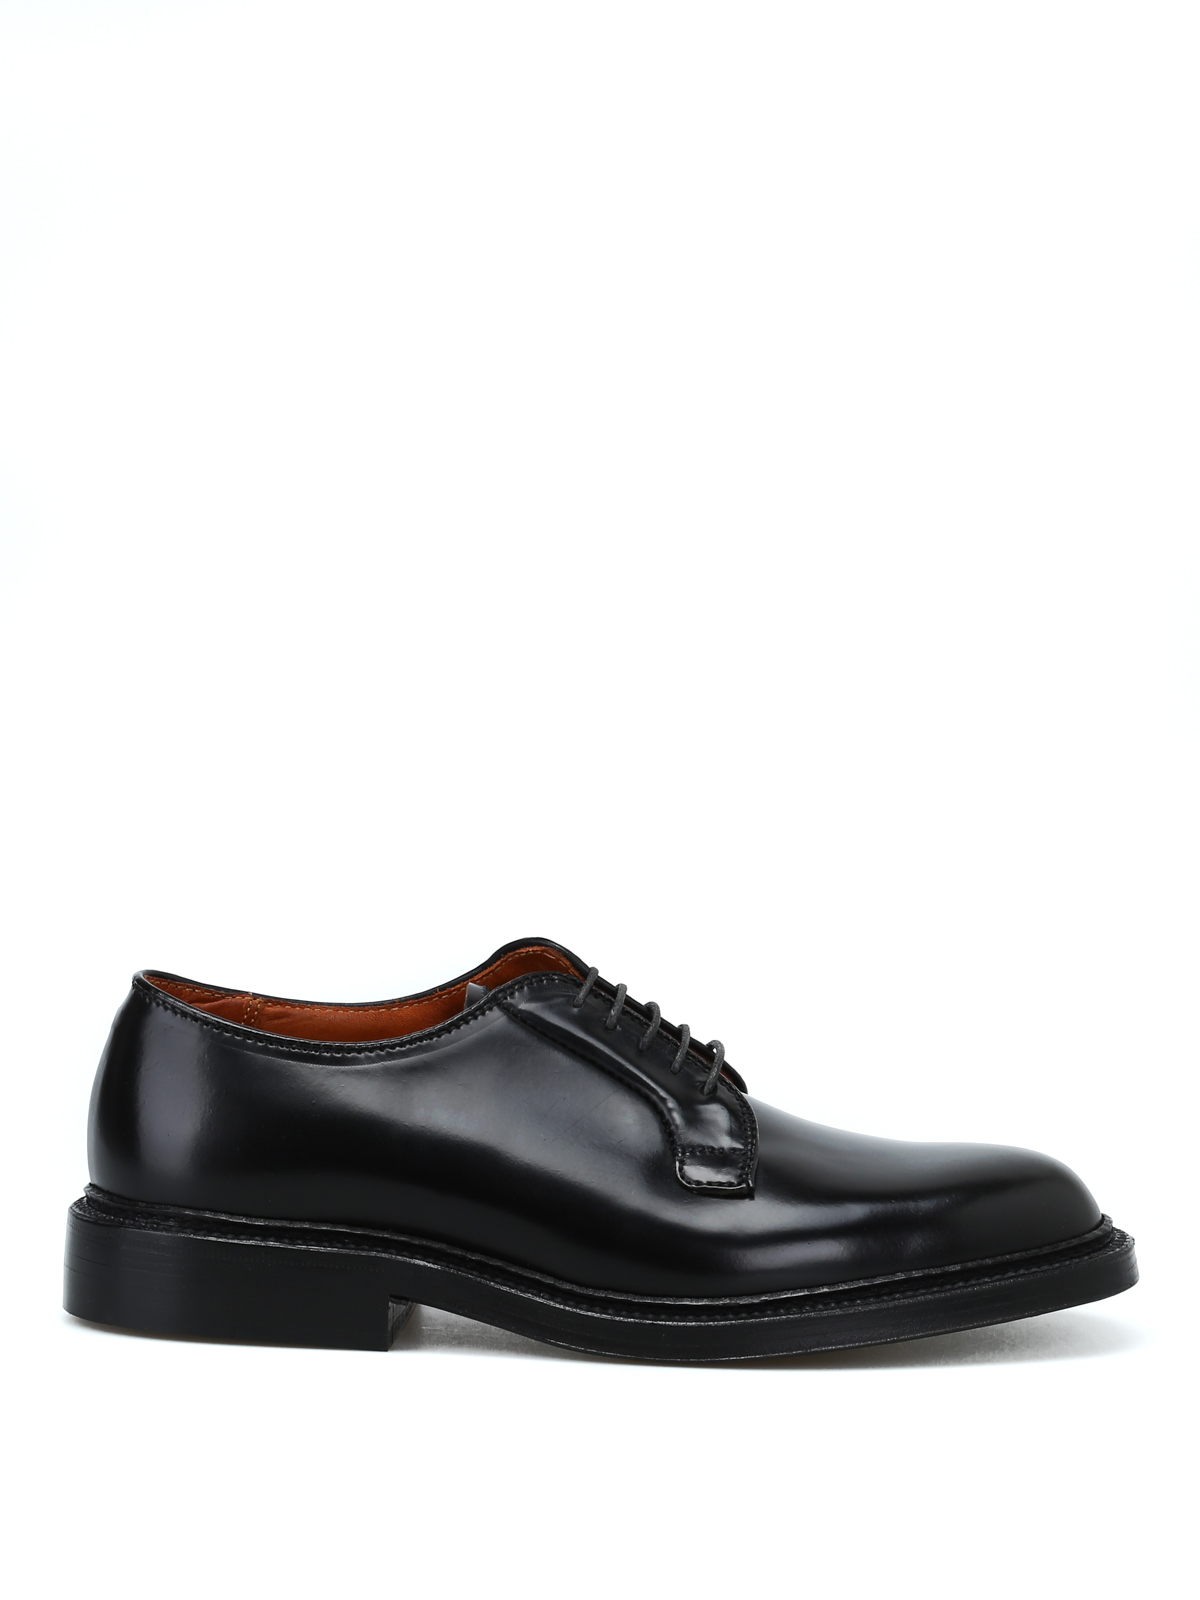 Classic shoes Alden - Horween black brushed leather Derby shoes - 9901